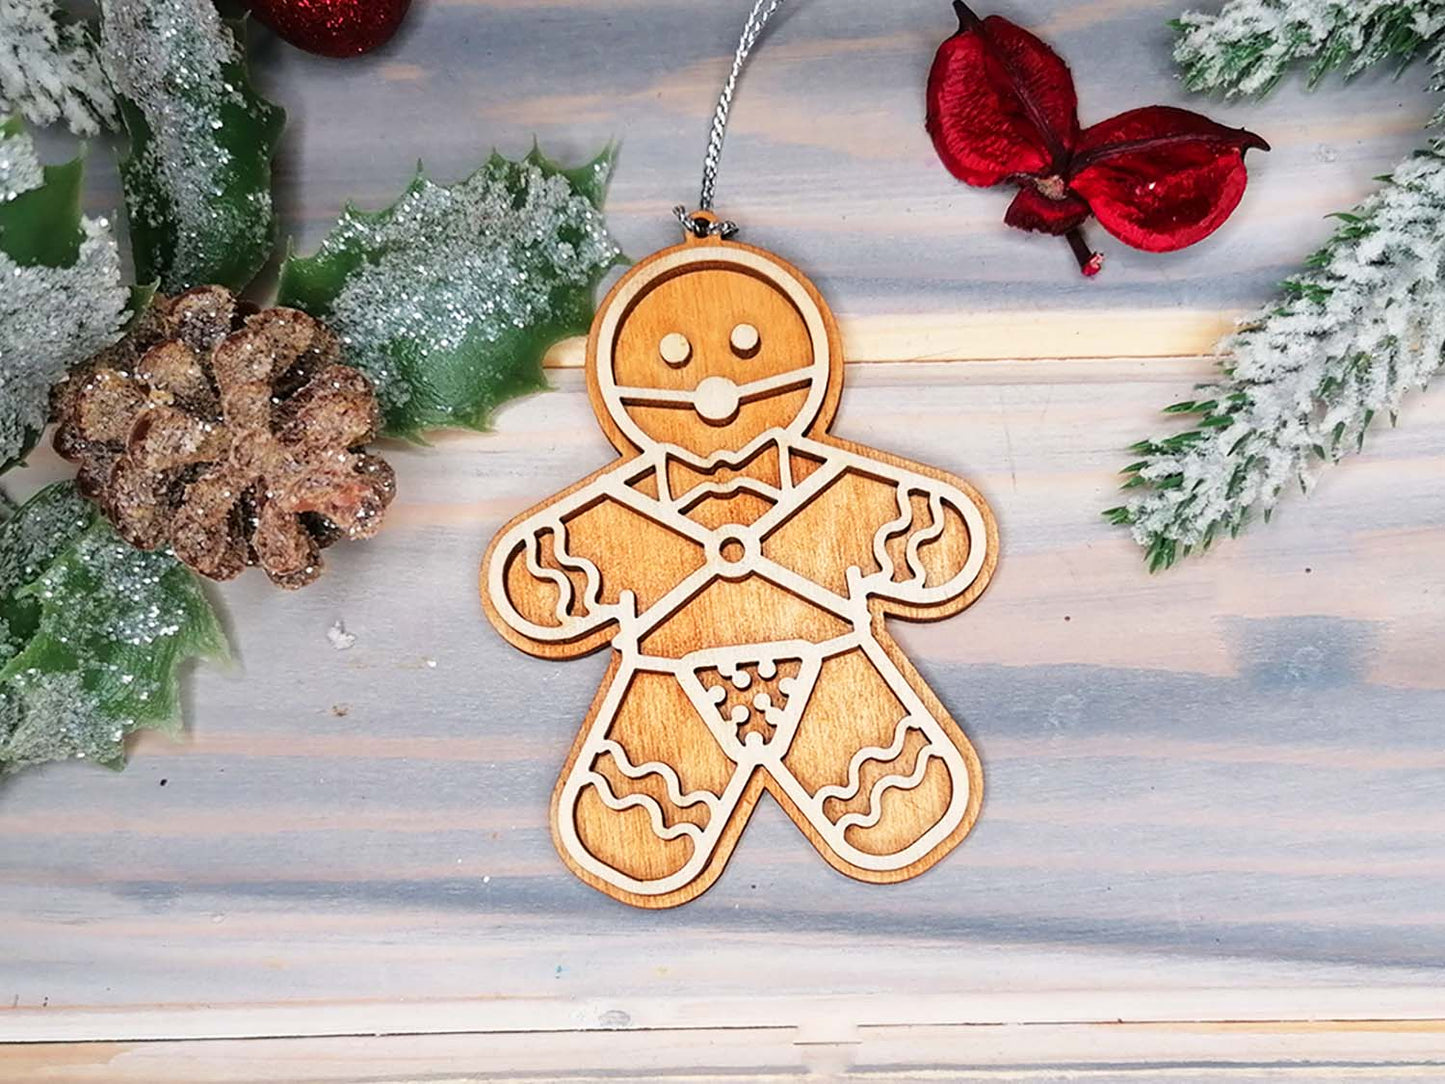 Man Naughty Funny Gingerbread Christmas Decoration